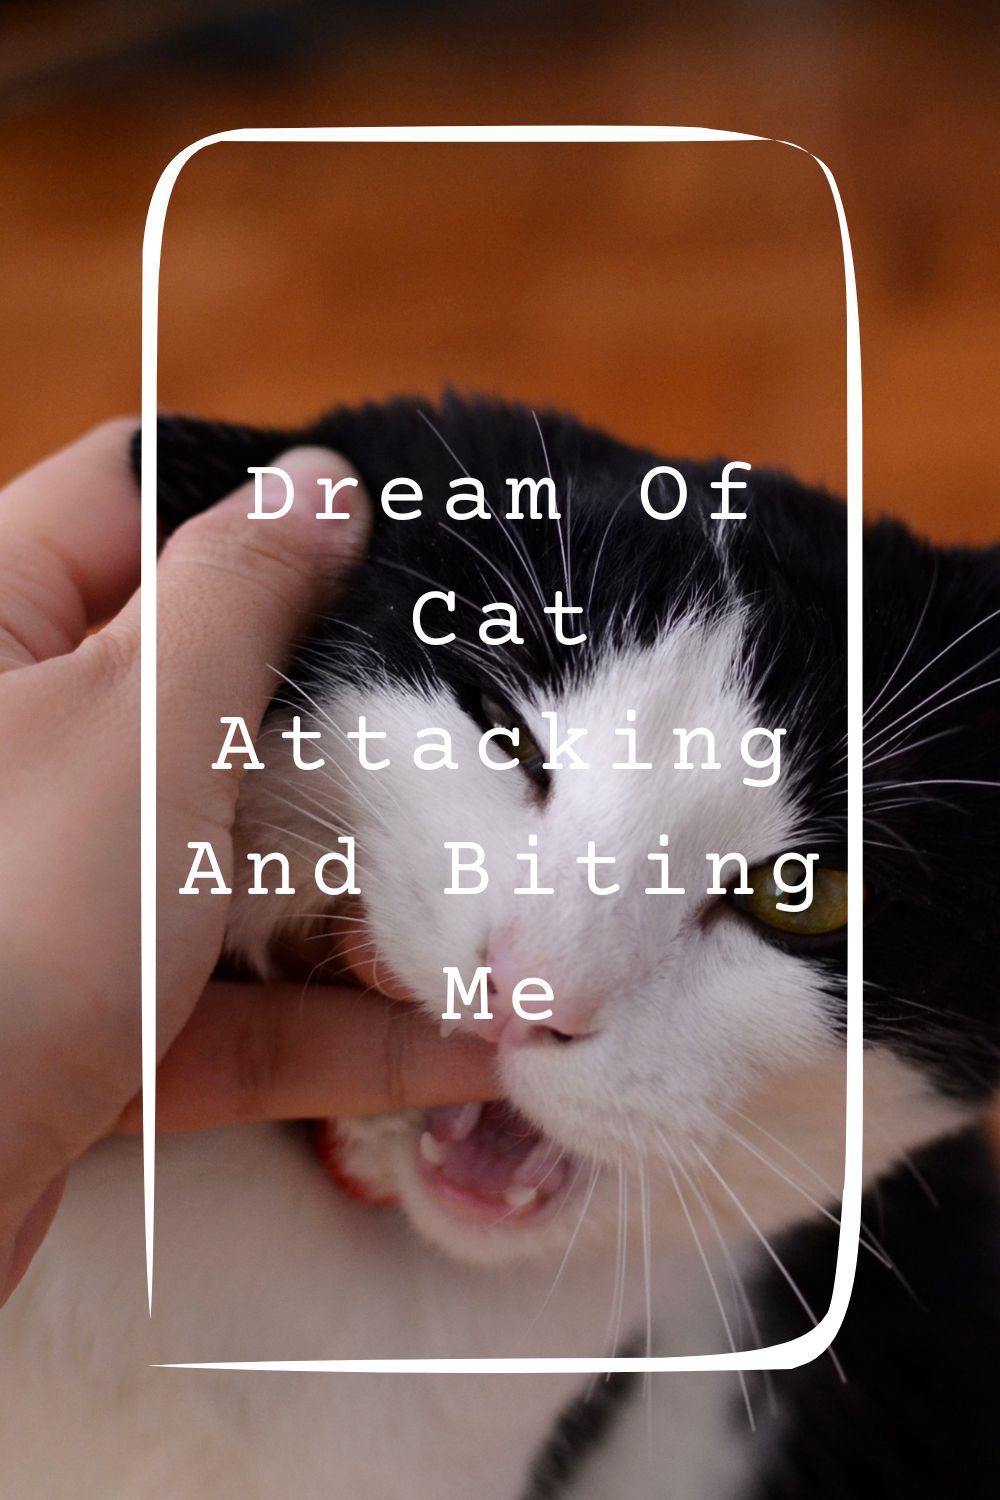 Dream Of Cat Attacking And Biting Me Meanings 2